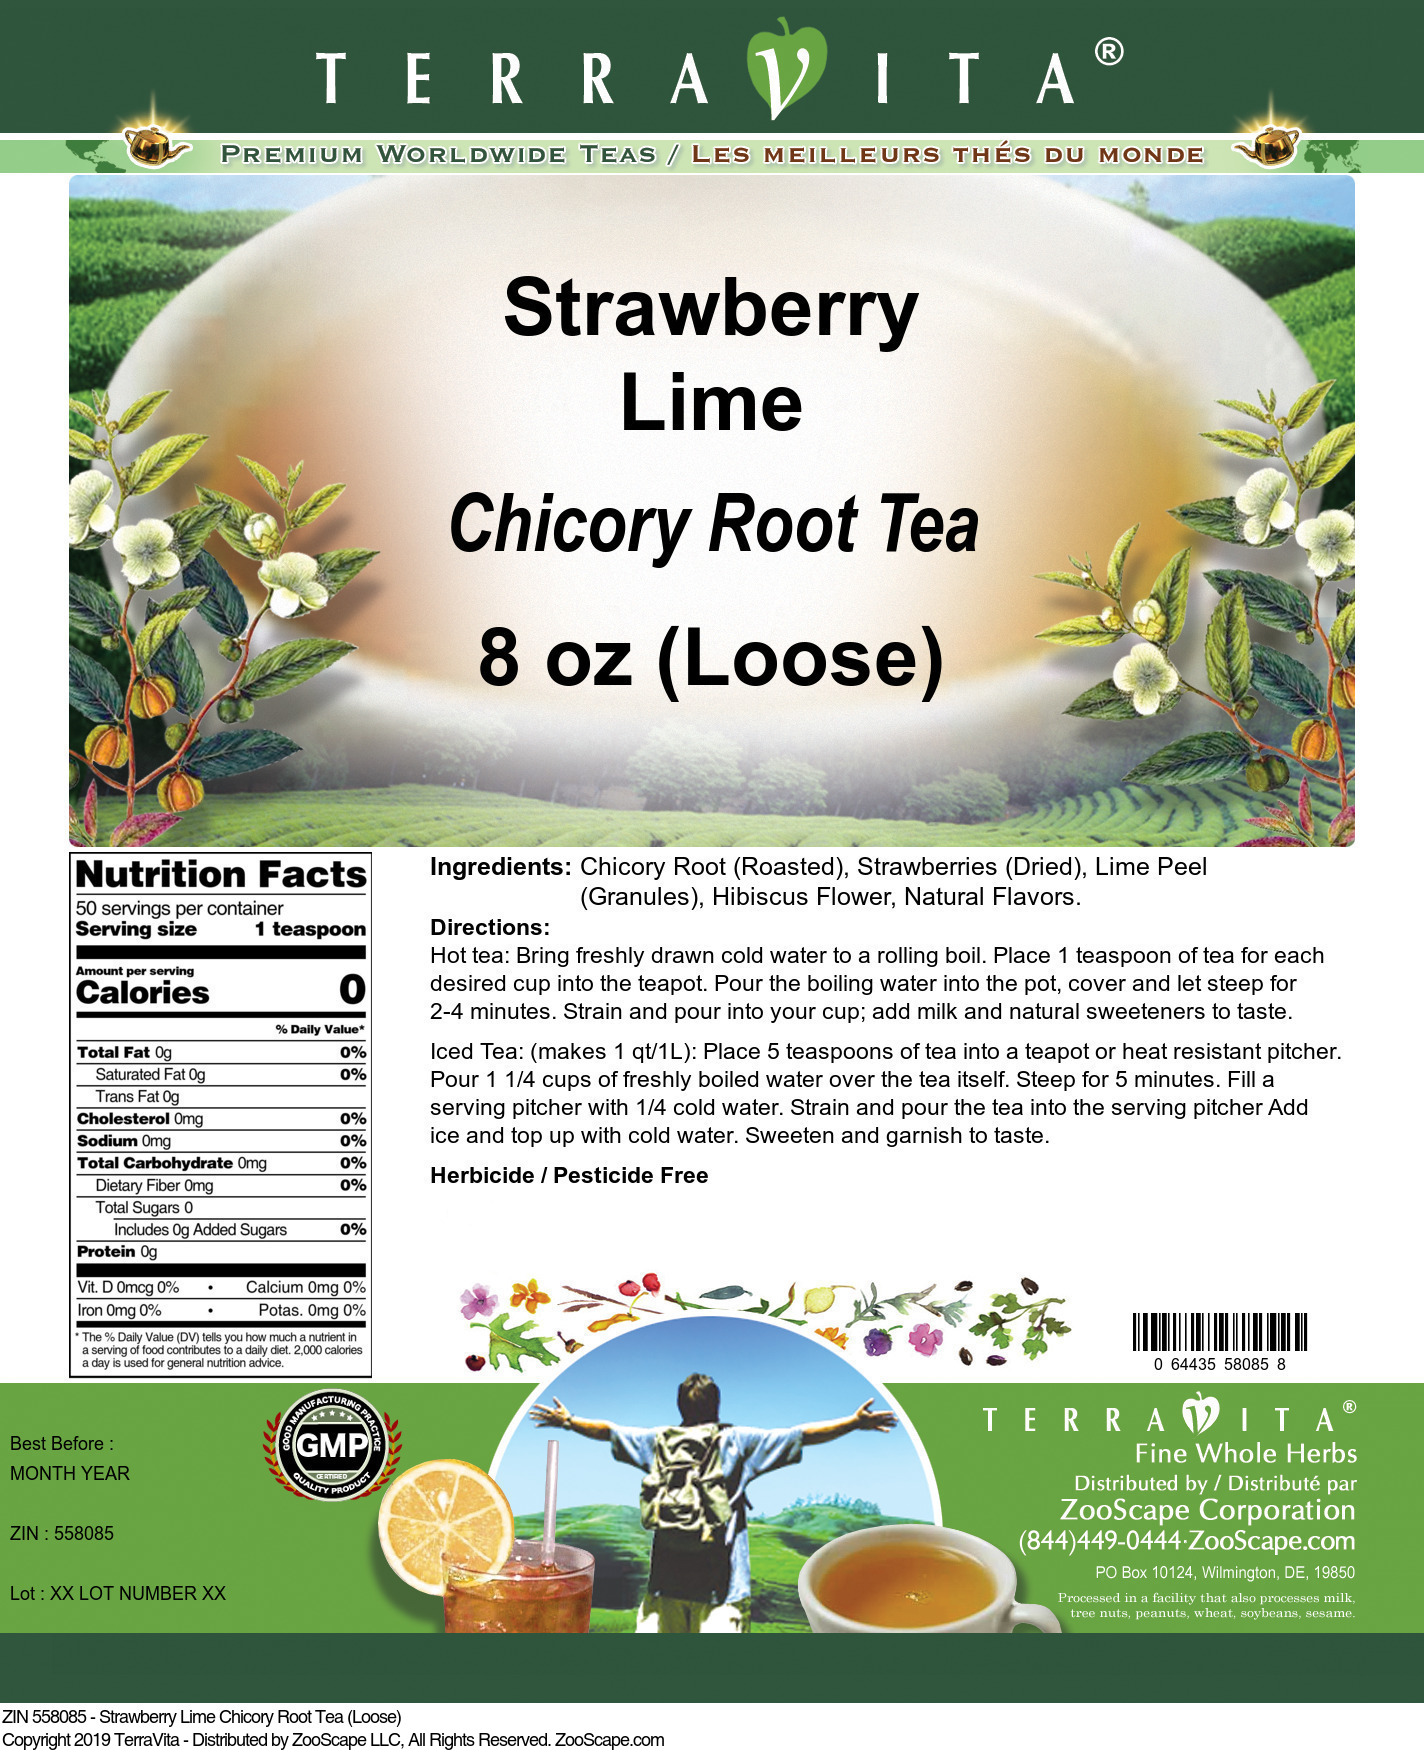 Strawberry Lime Chicory Root Tea (Loose) - Label